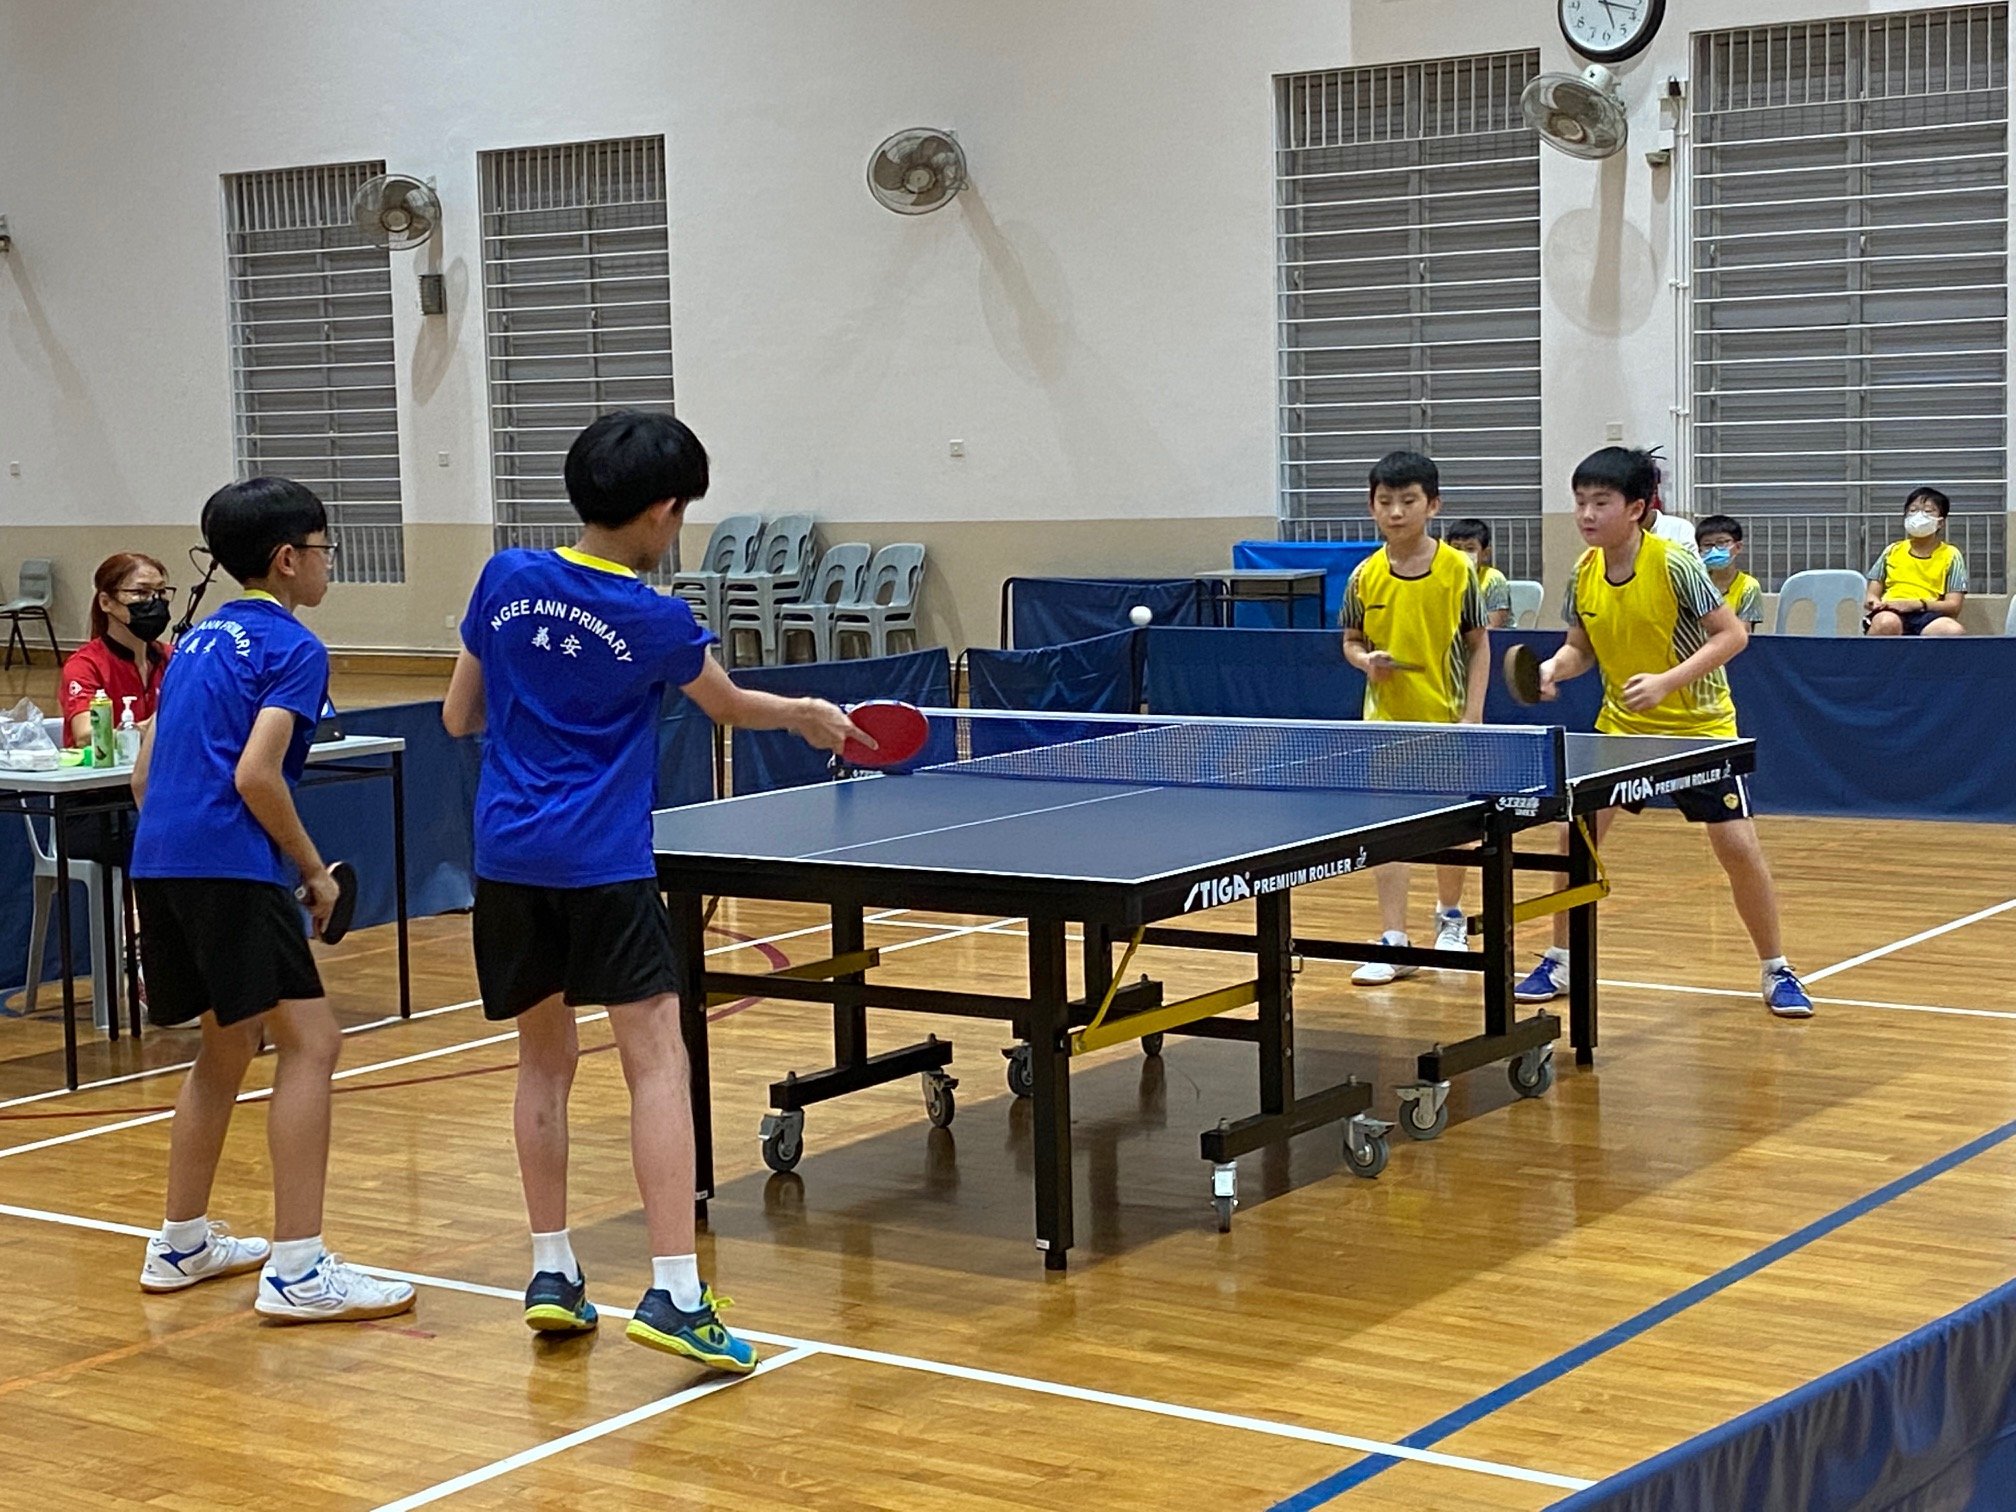 NSG East Zone Snr Div boys table tennis final - second doubles